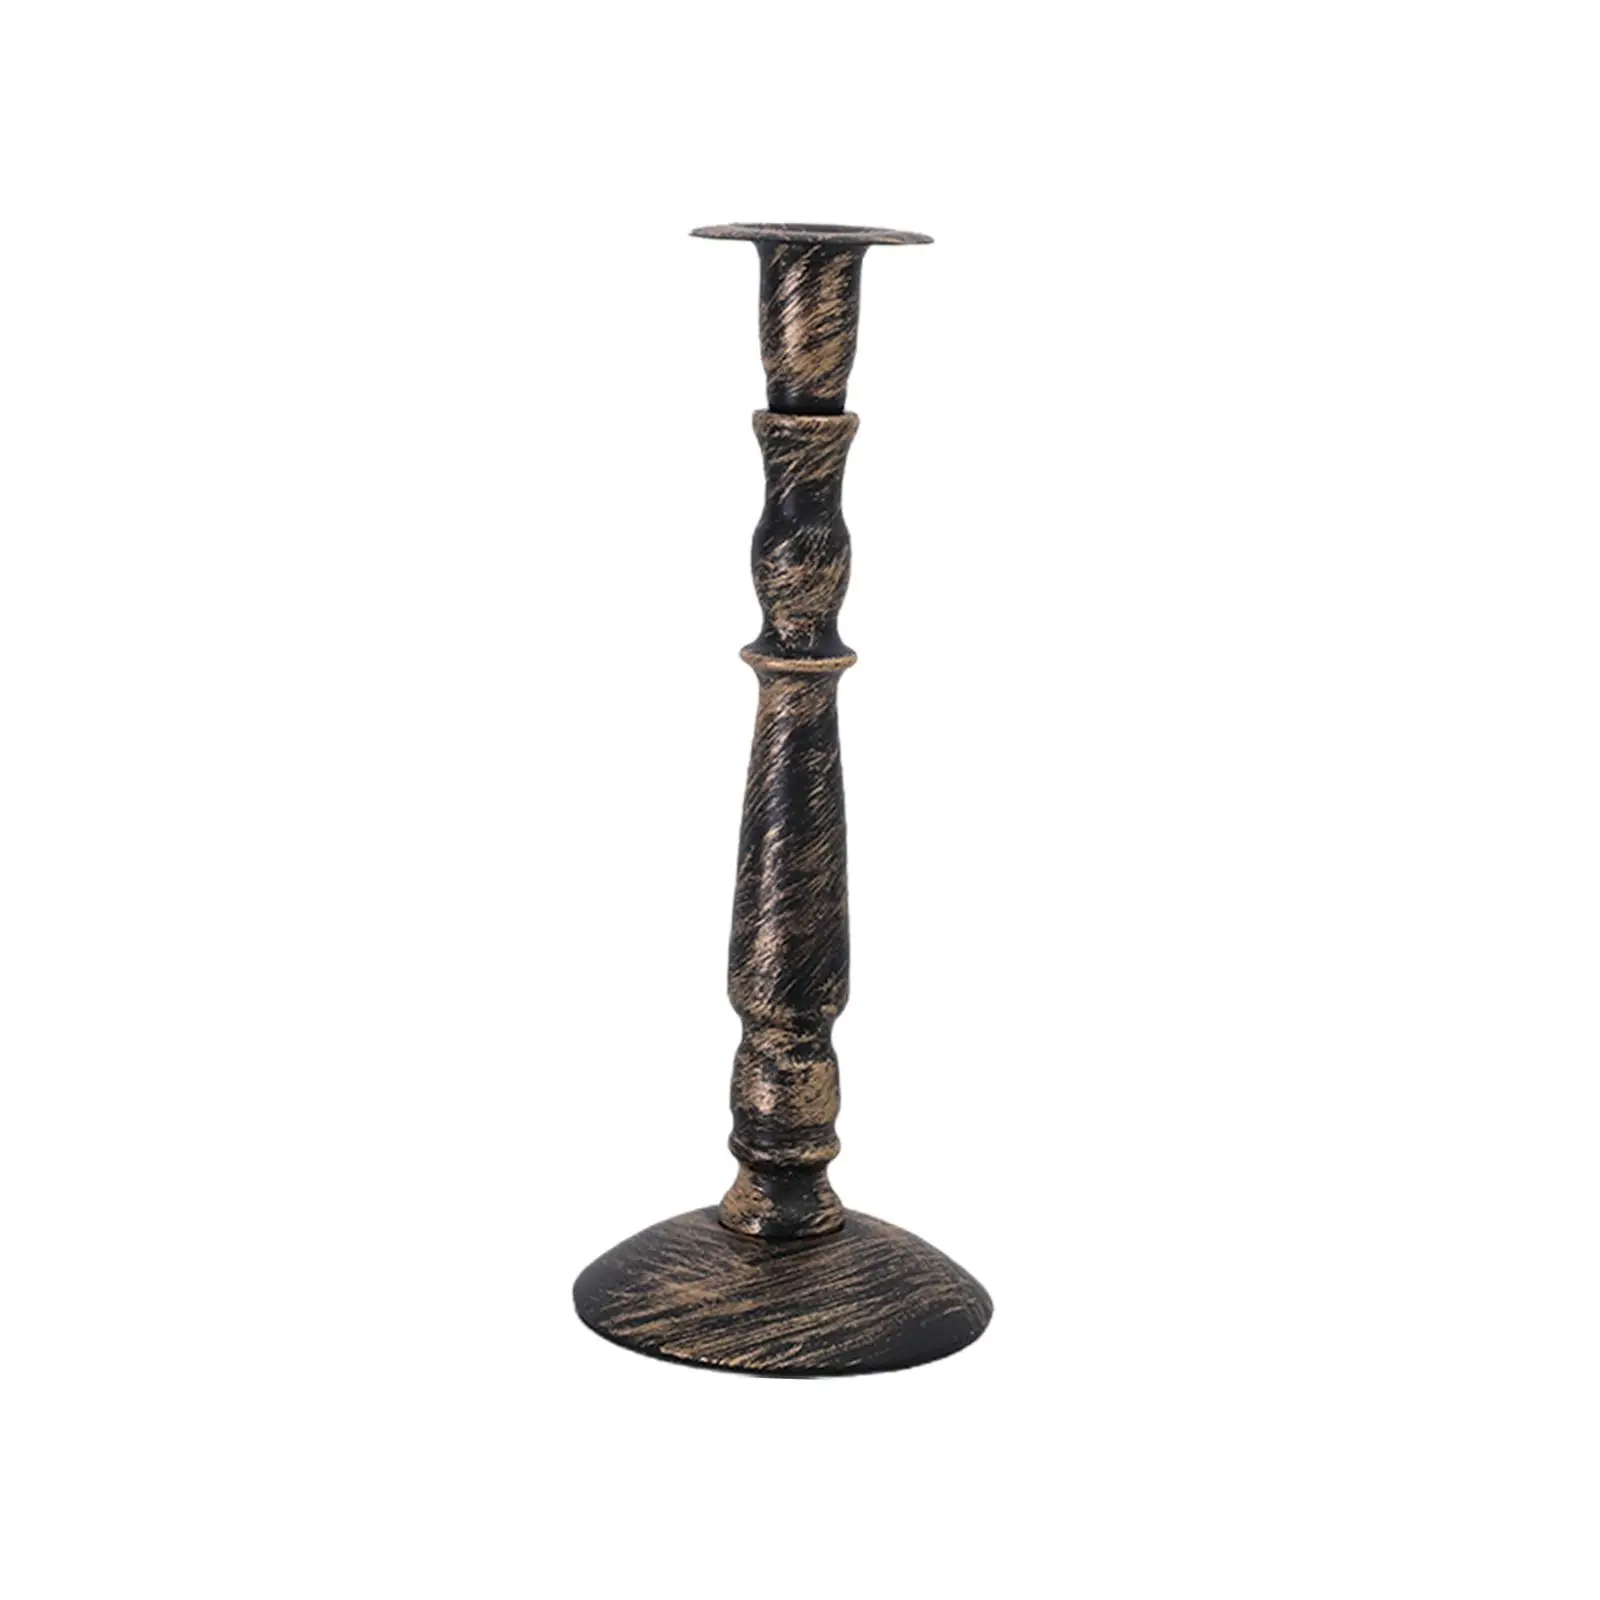 Golden Candlestick Holder Wedding Candle Stand Create Relaxing